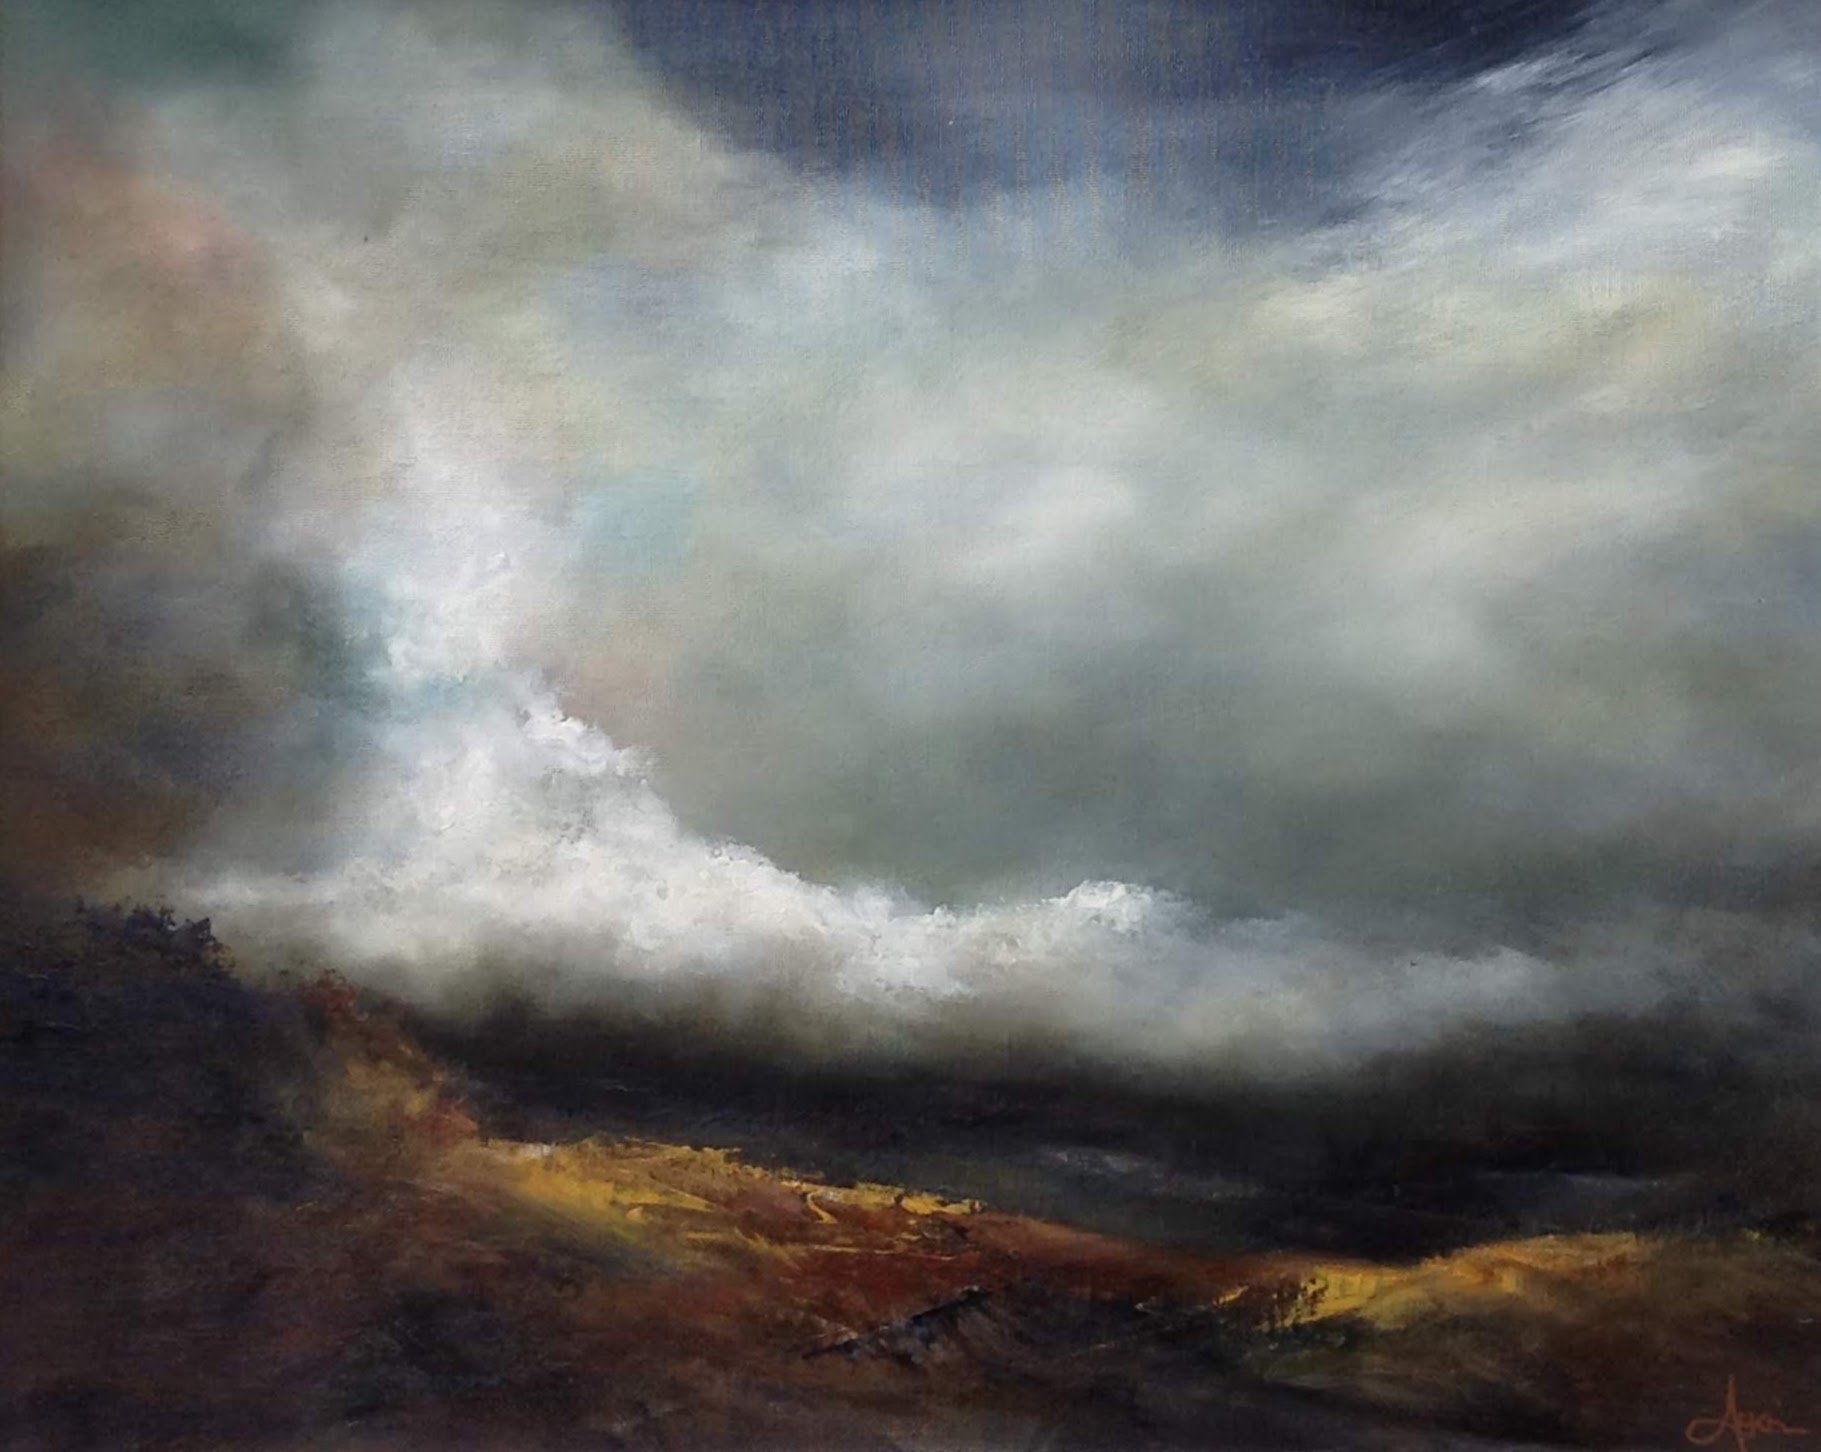 'Bubbling Clouds, Ayrshire' by artist Alison Lyon